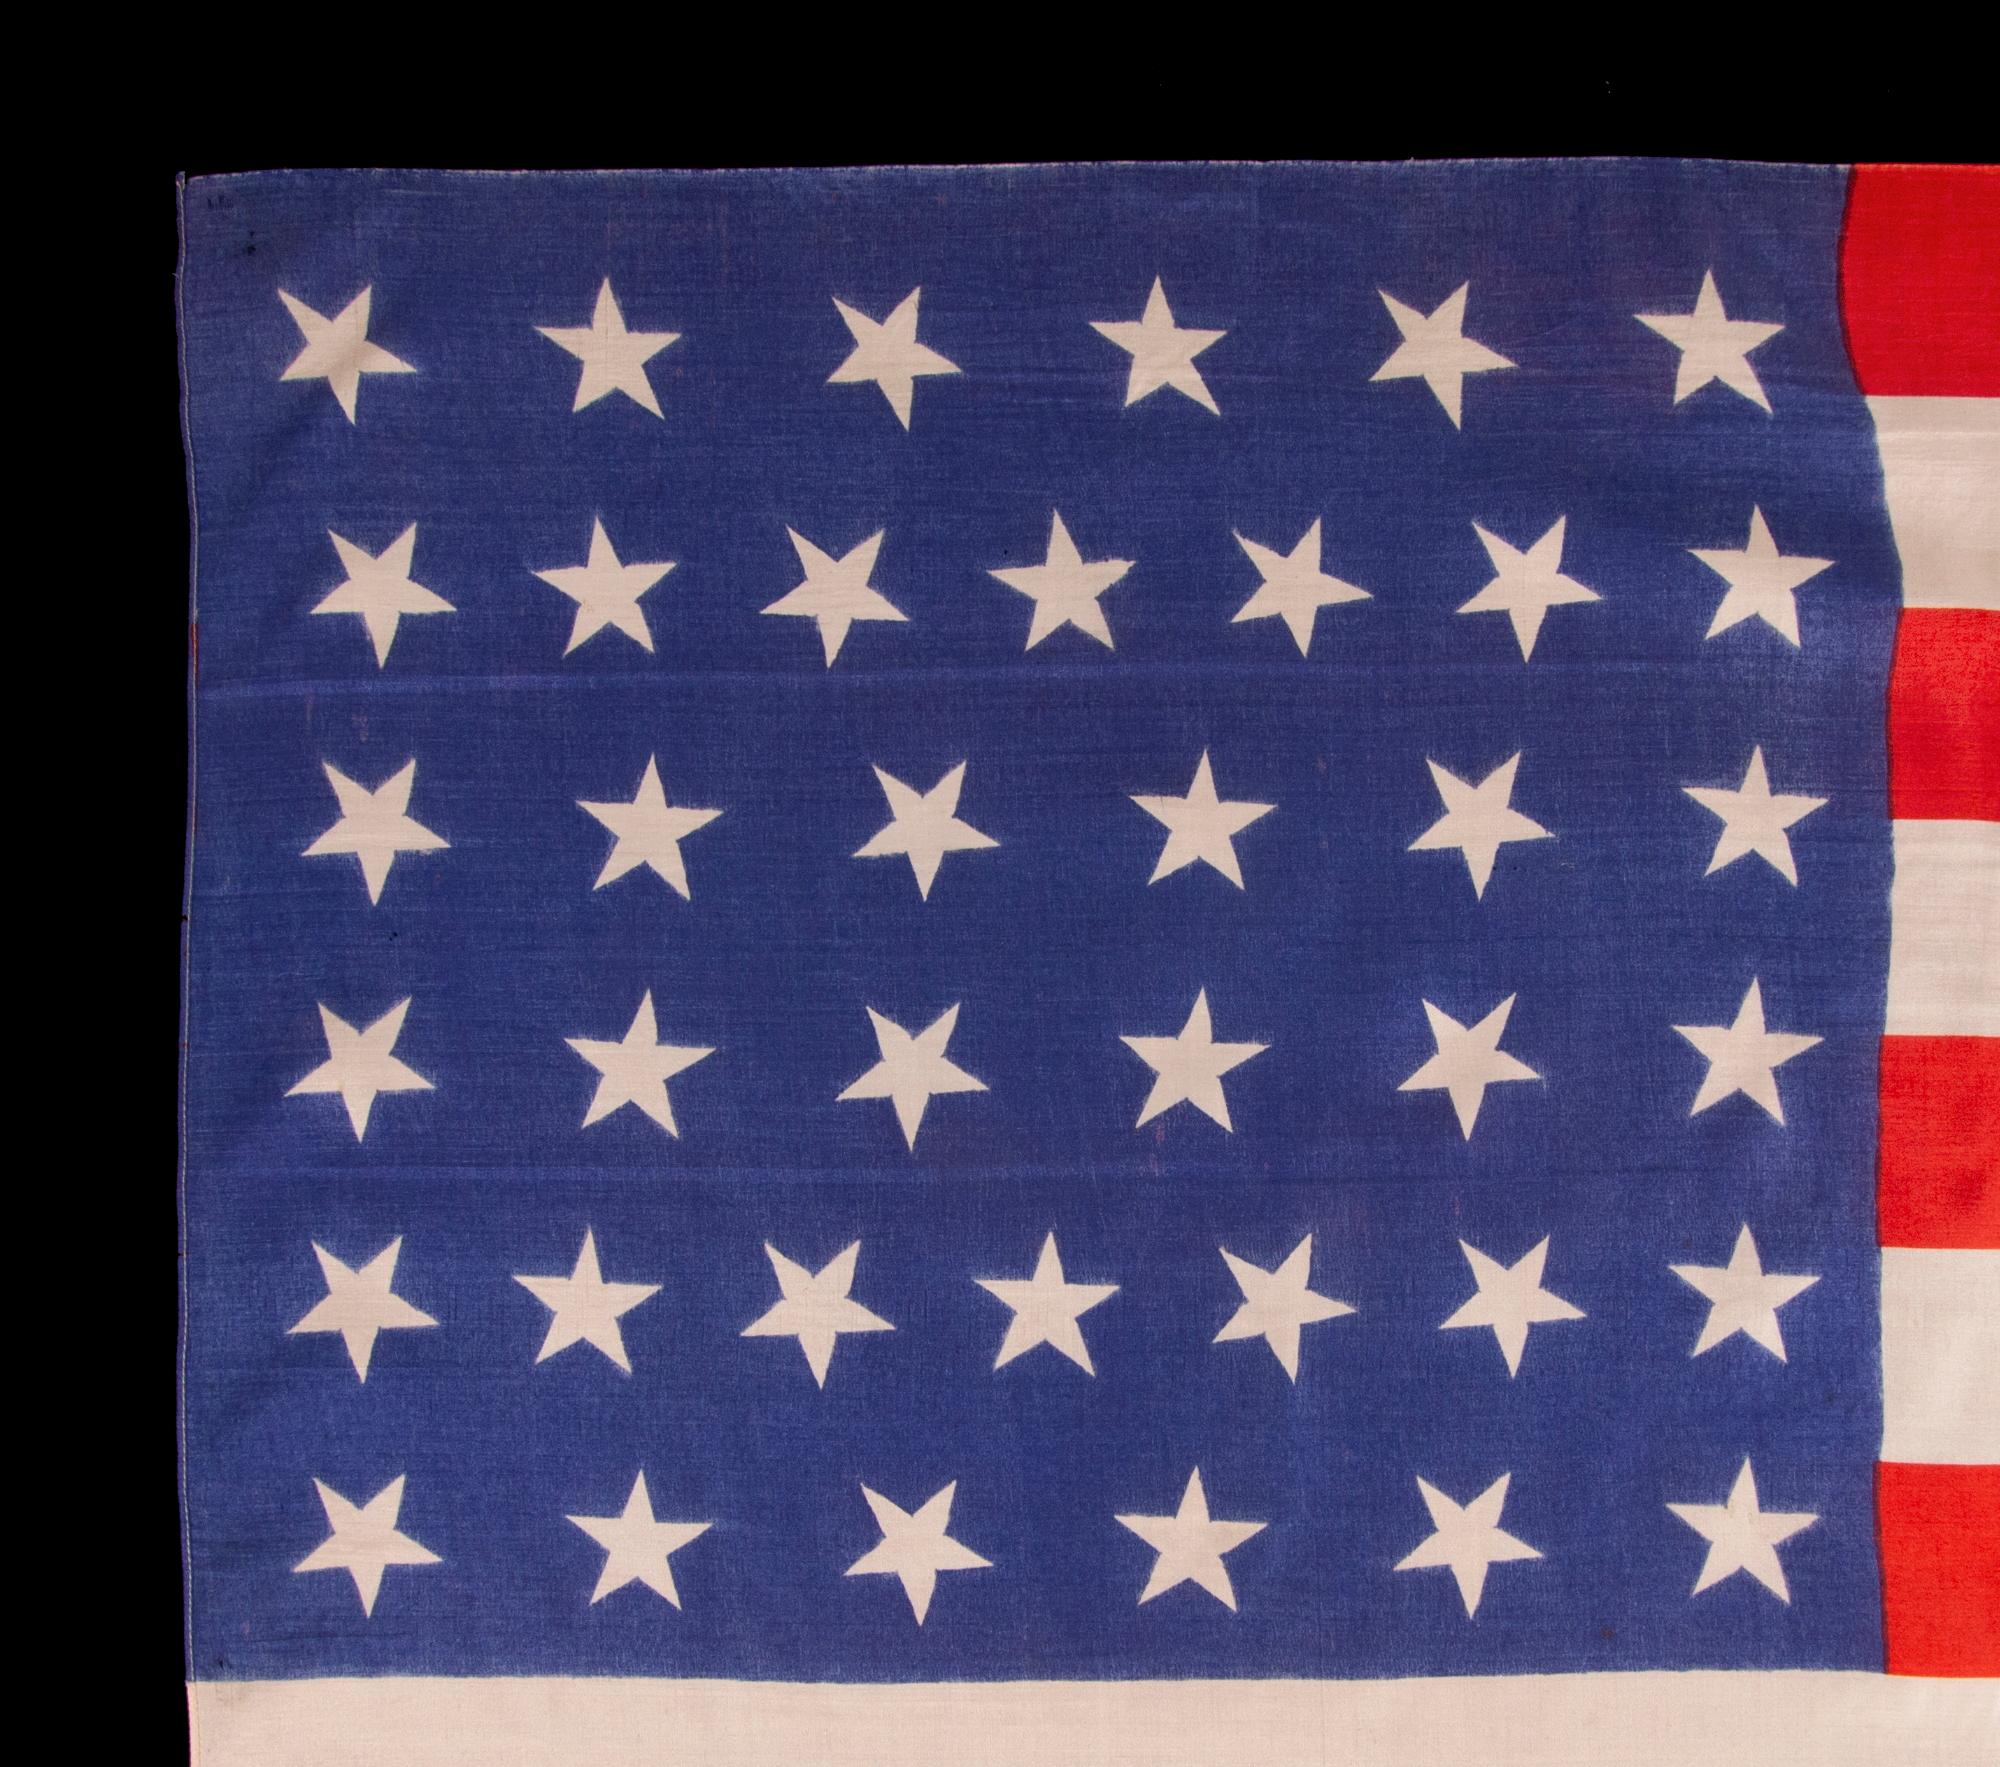 38 Star Antique American Flag, Colorado Statehood, ca 1876-1889 In Good Condition For Sale In York County, PA